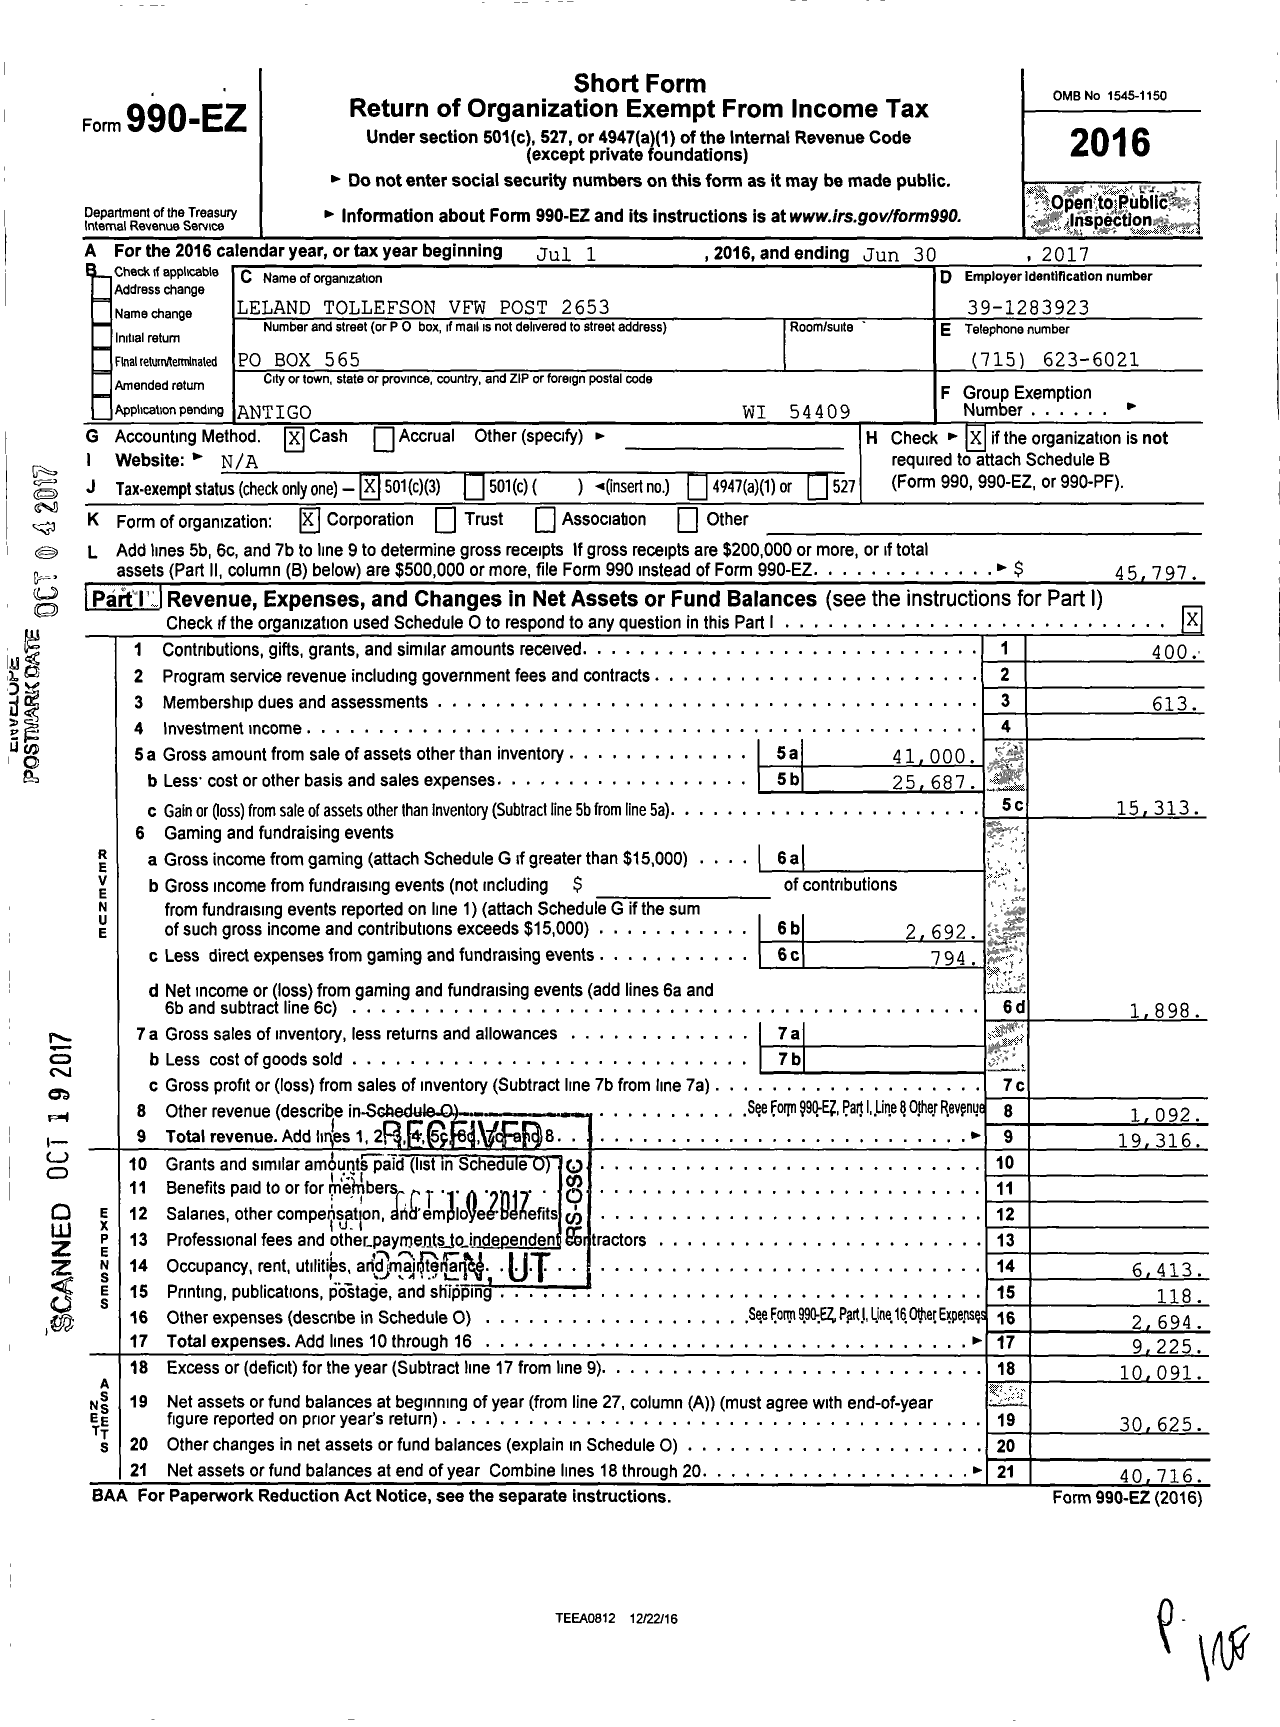 Image of first page of 2016 Form 990EZ for VFW Wi - 2653 Post Leland Tollefson